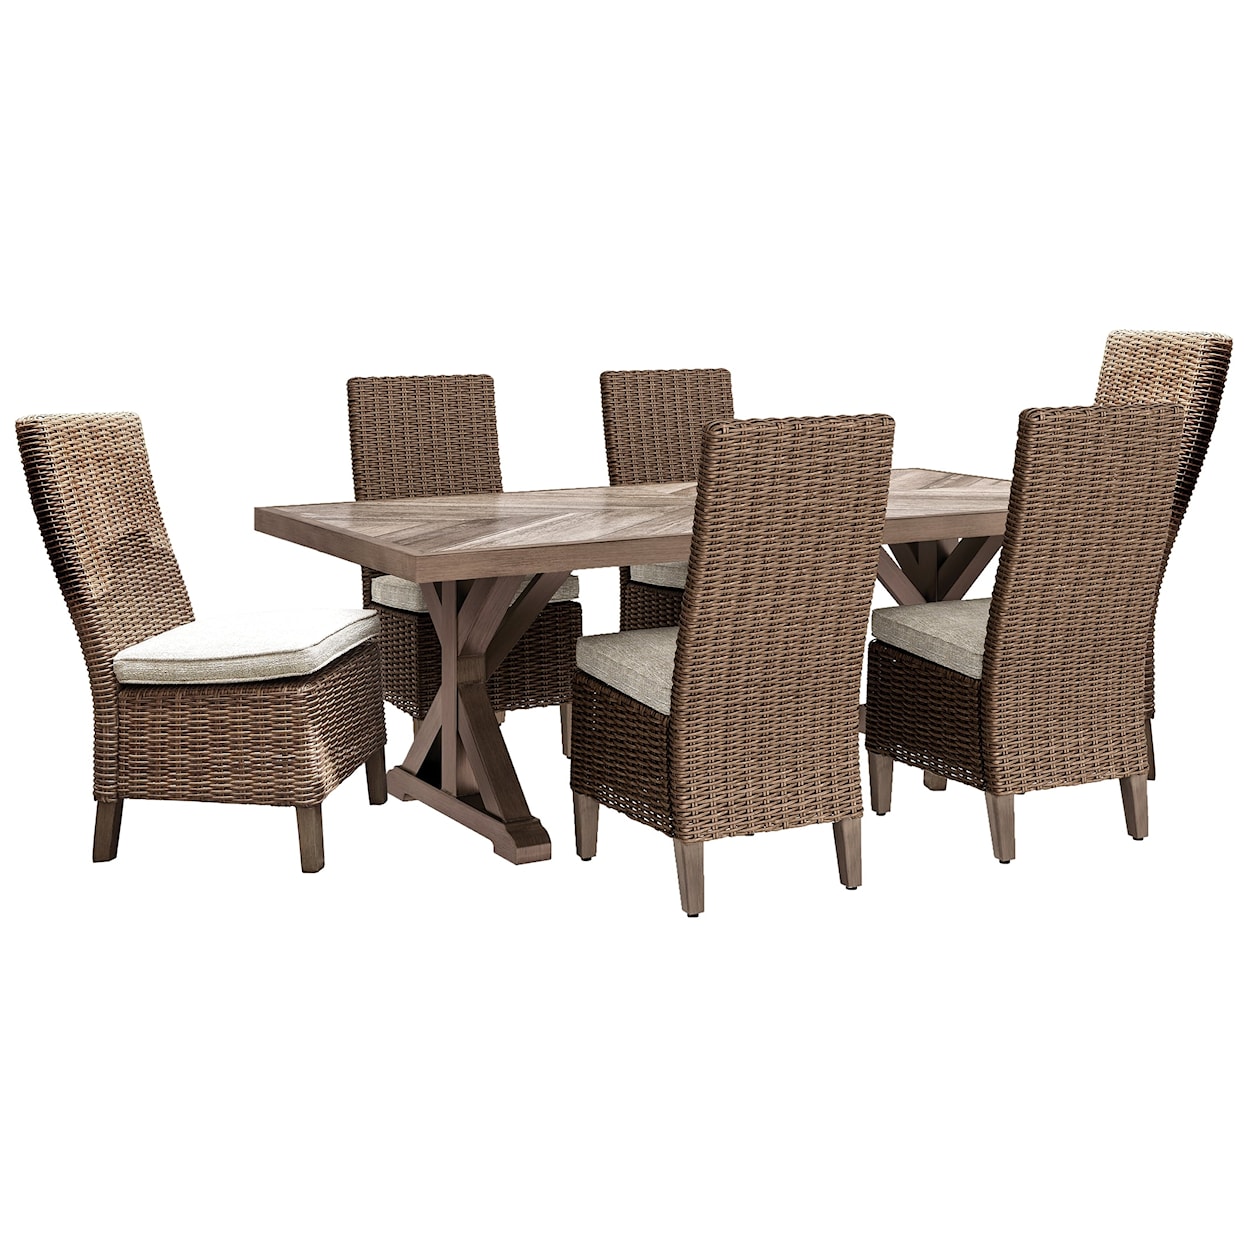 Ashley Signature Design Beachcroft Outdoor Dining Table with 6 Chairs